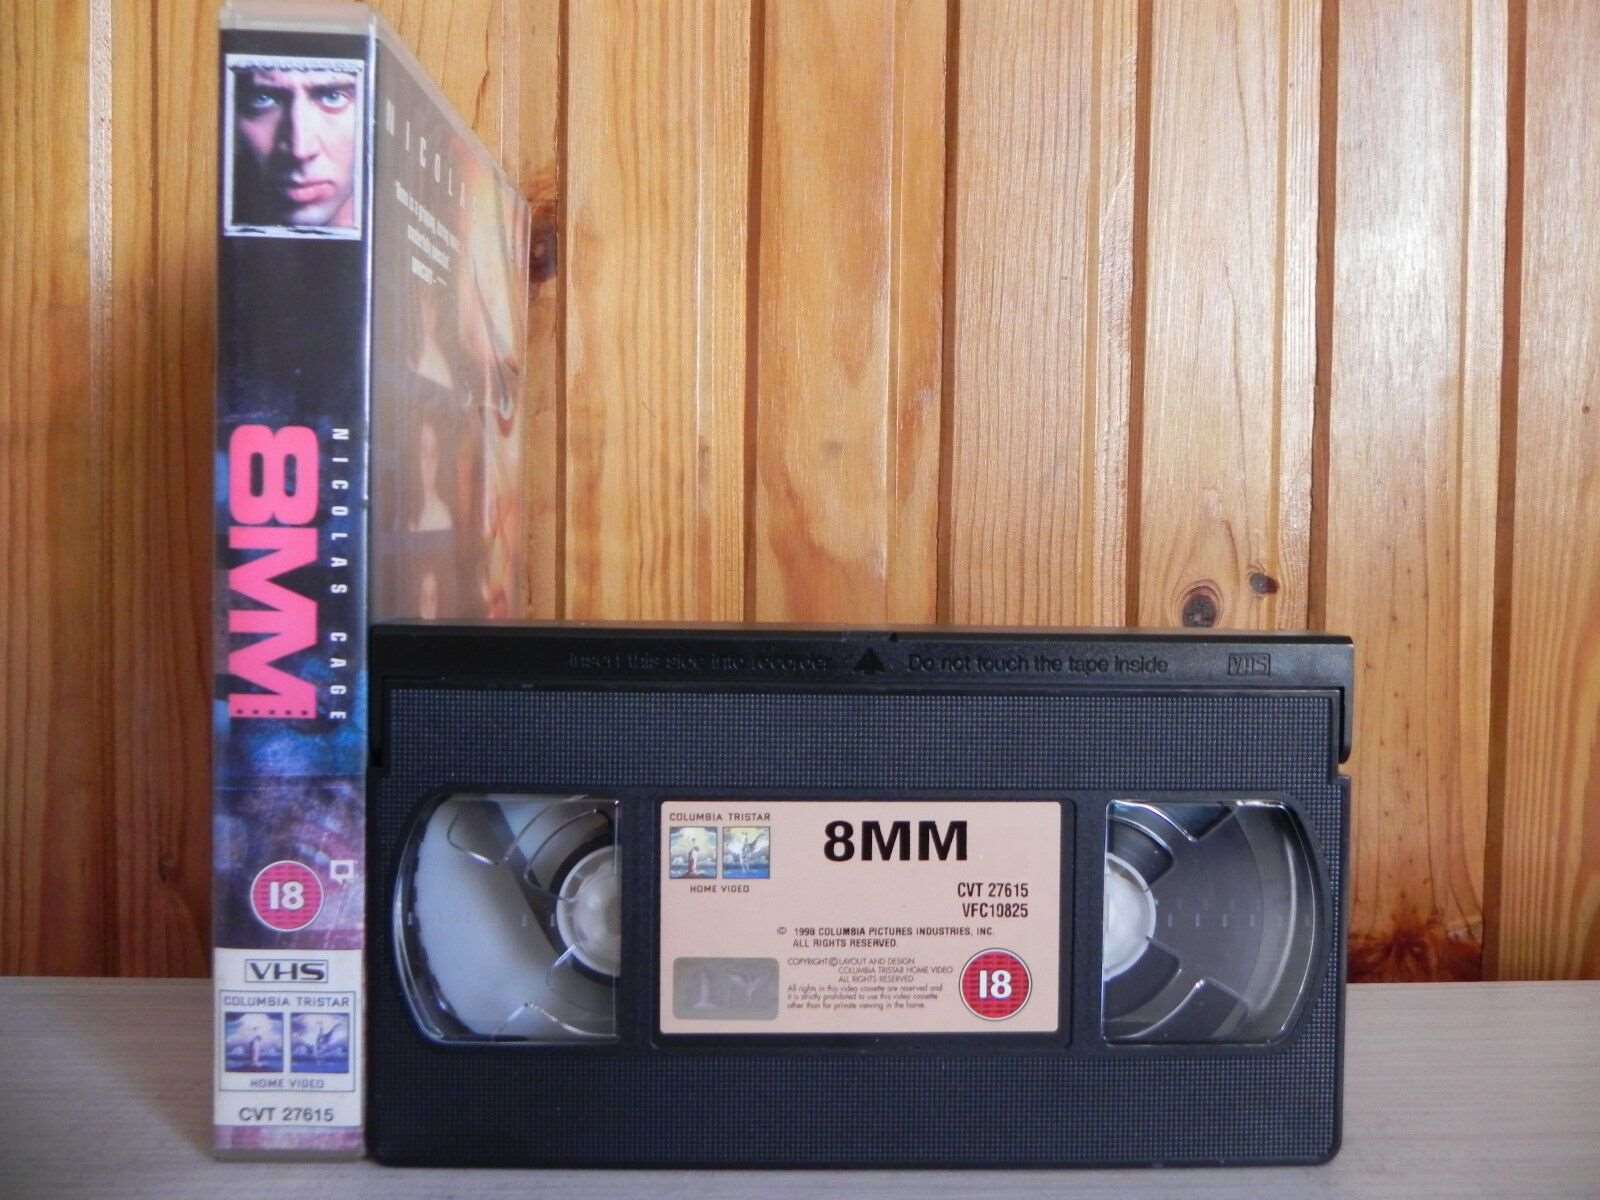 8MM - Eight Millimeter - Columbia - Action - Nicolas Cage - Chris Bauer - VHS-